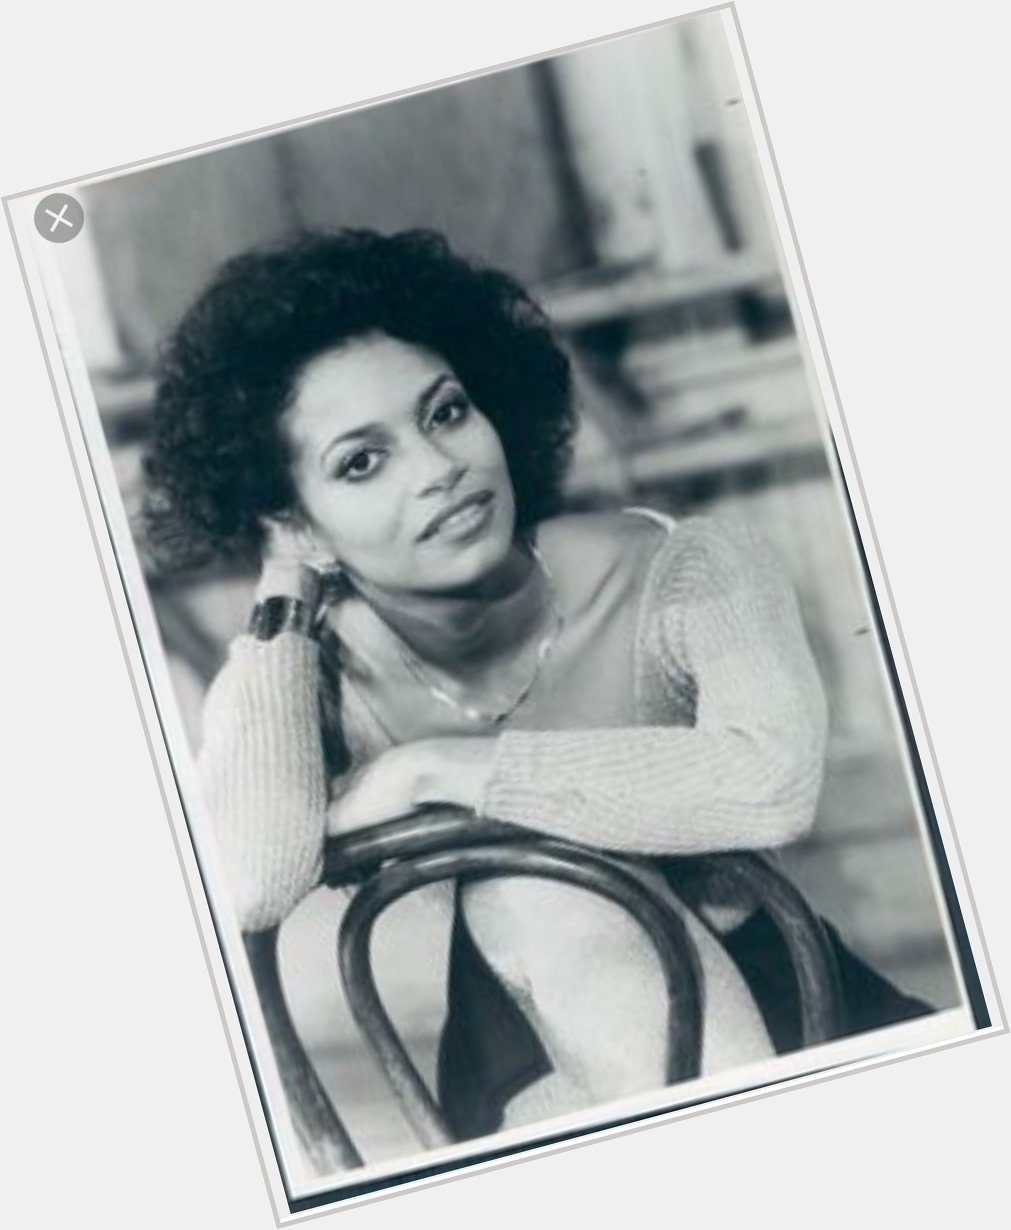 Happy bday to the beautiful and talent Debbie Allen!!! She\s a great 